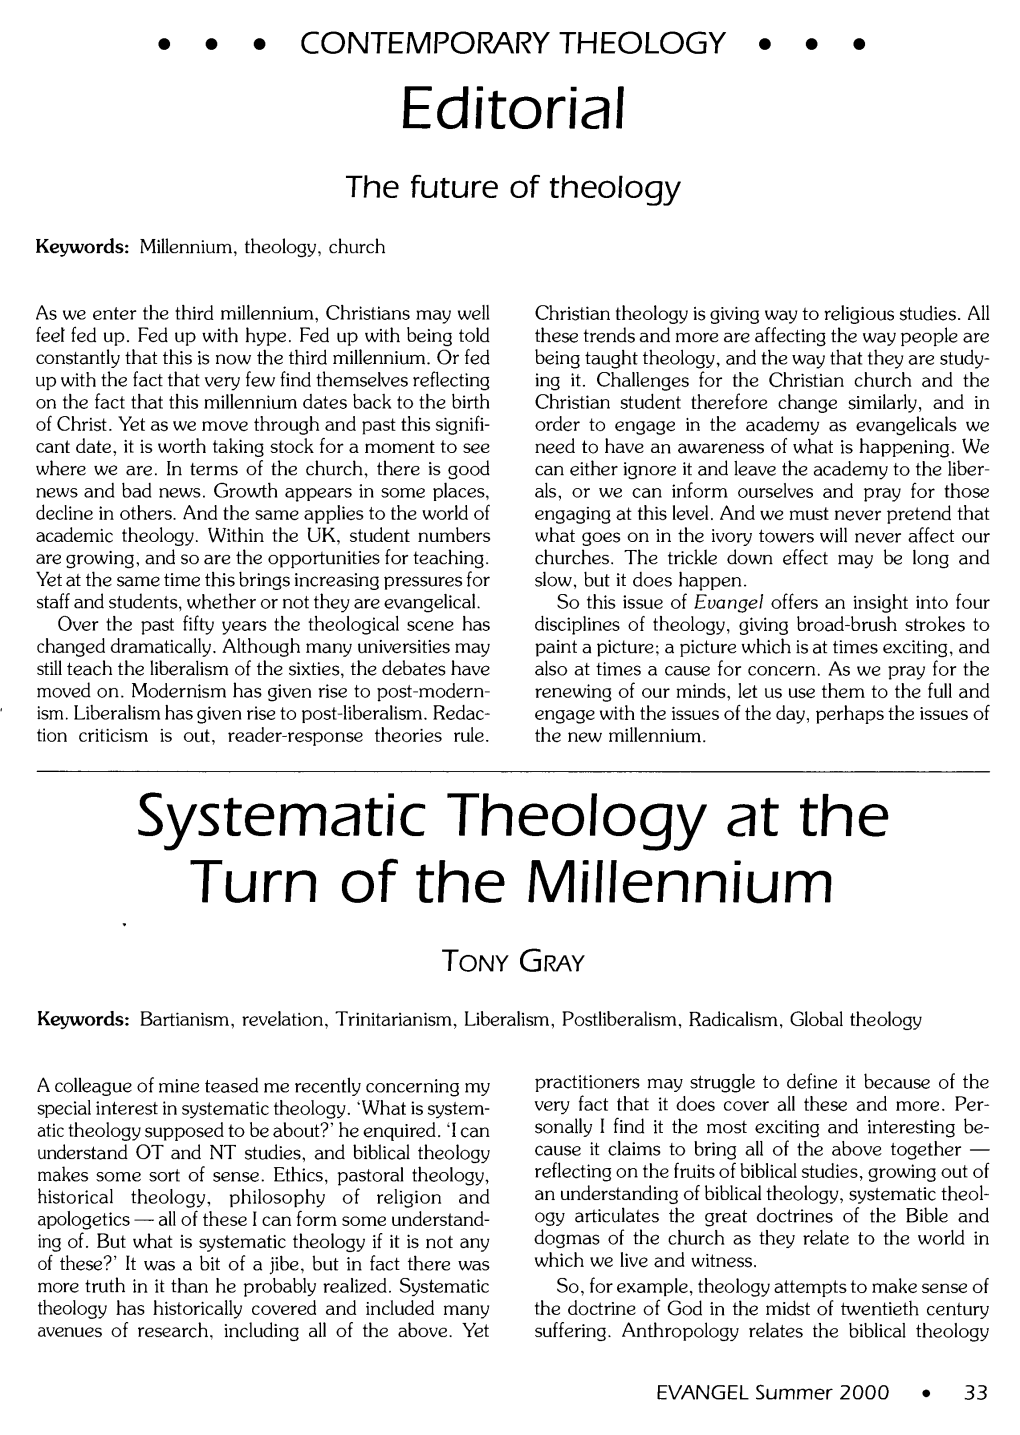 Systematic Theology at the Turn of Millennium